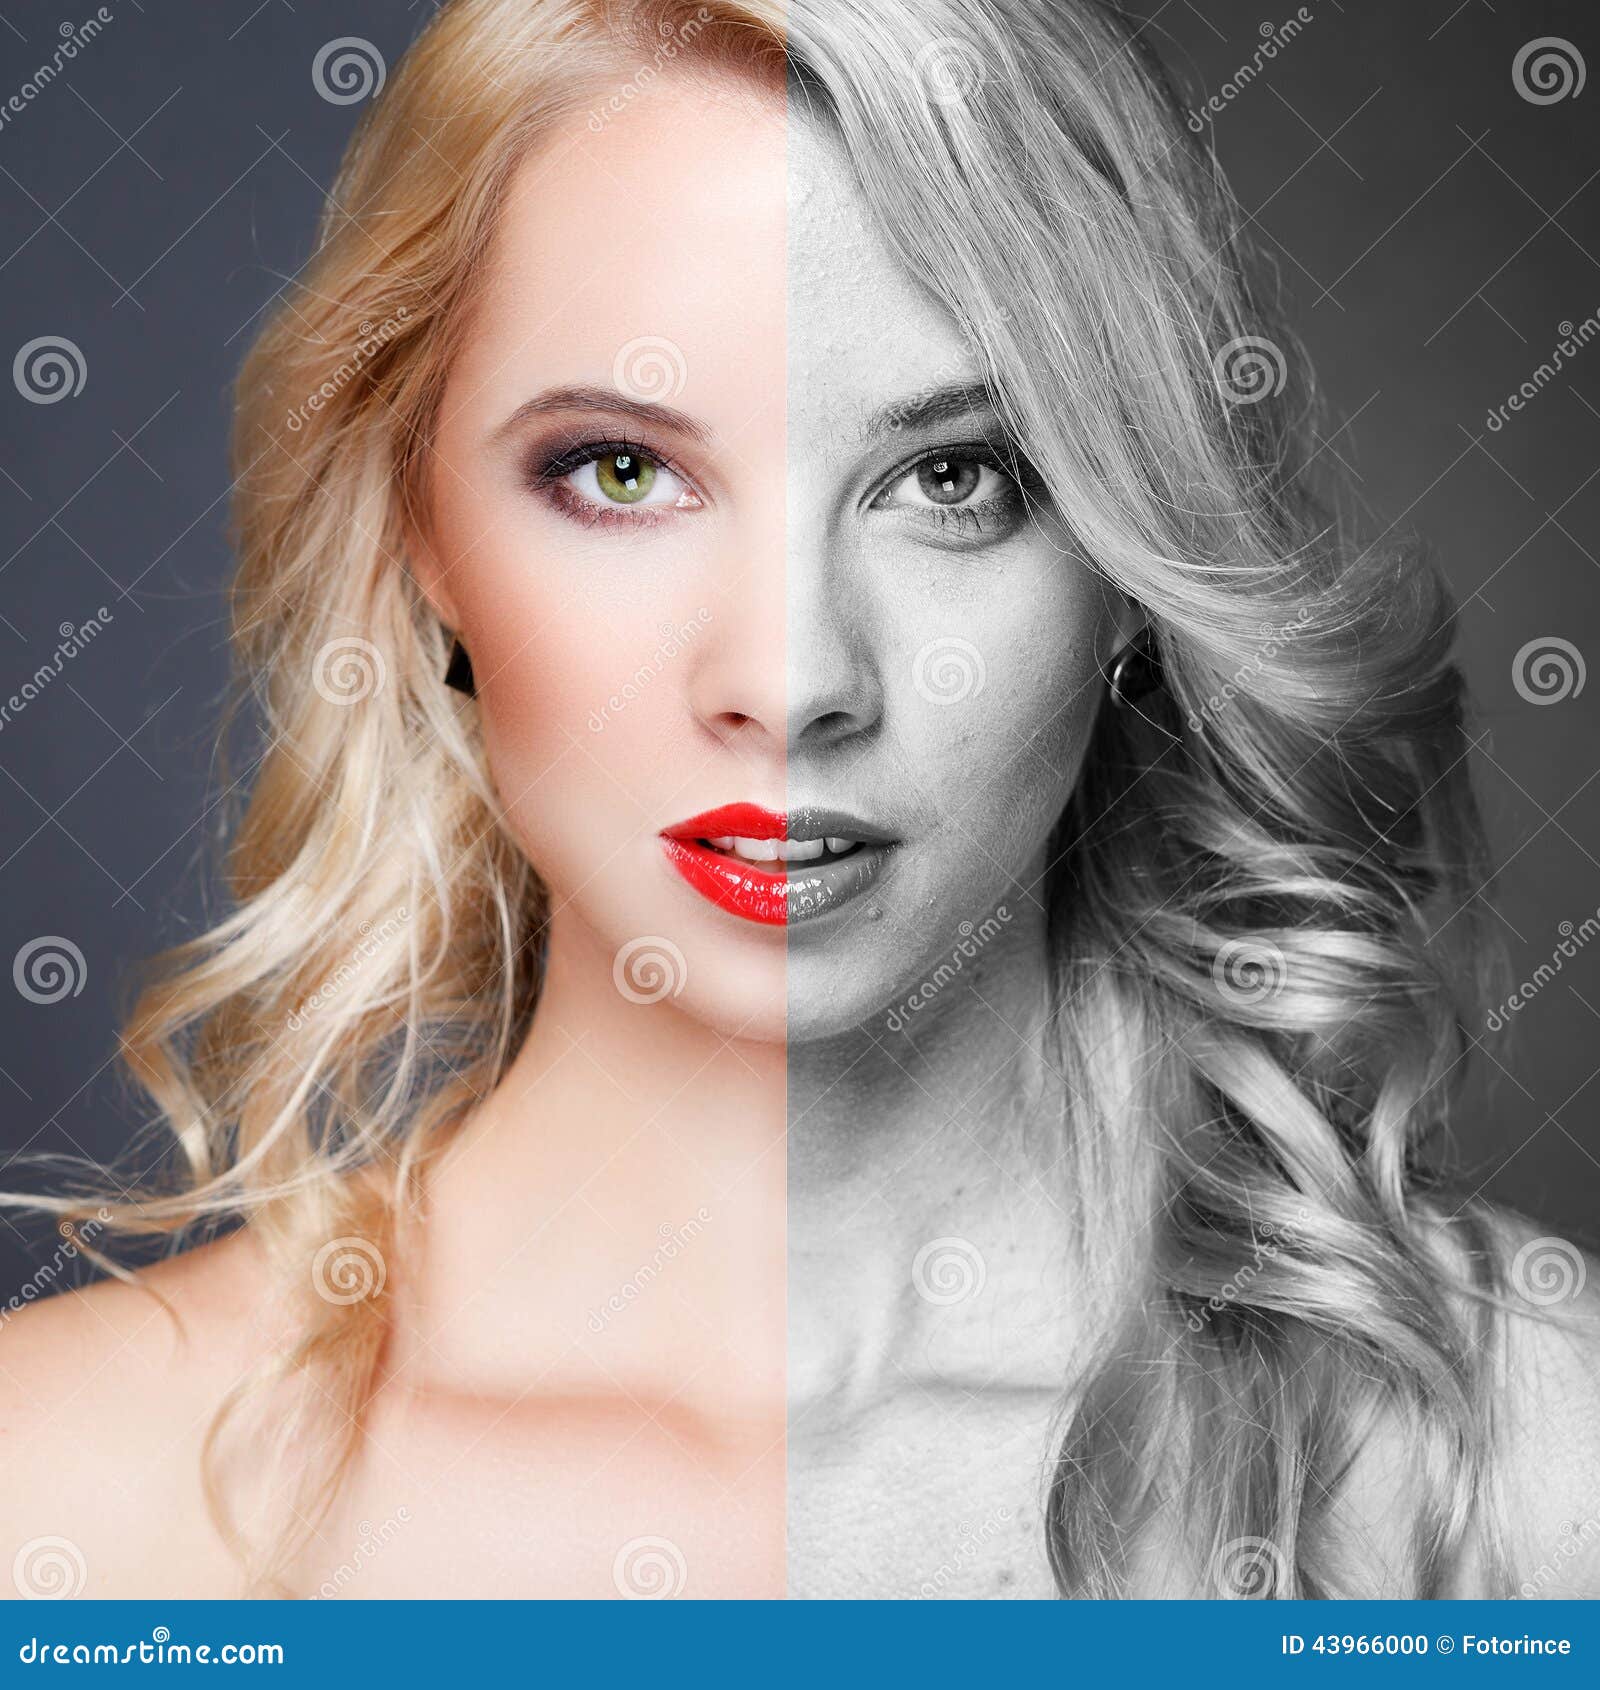 face of young woman before and after retouch